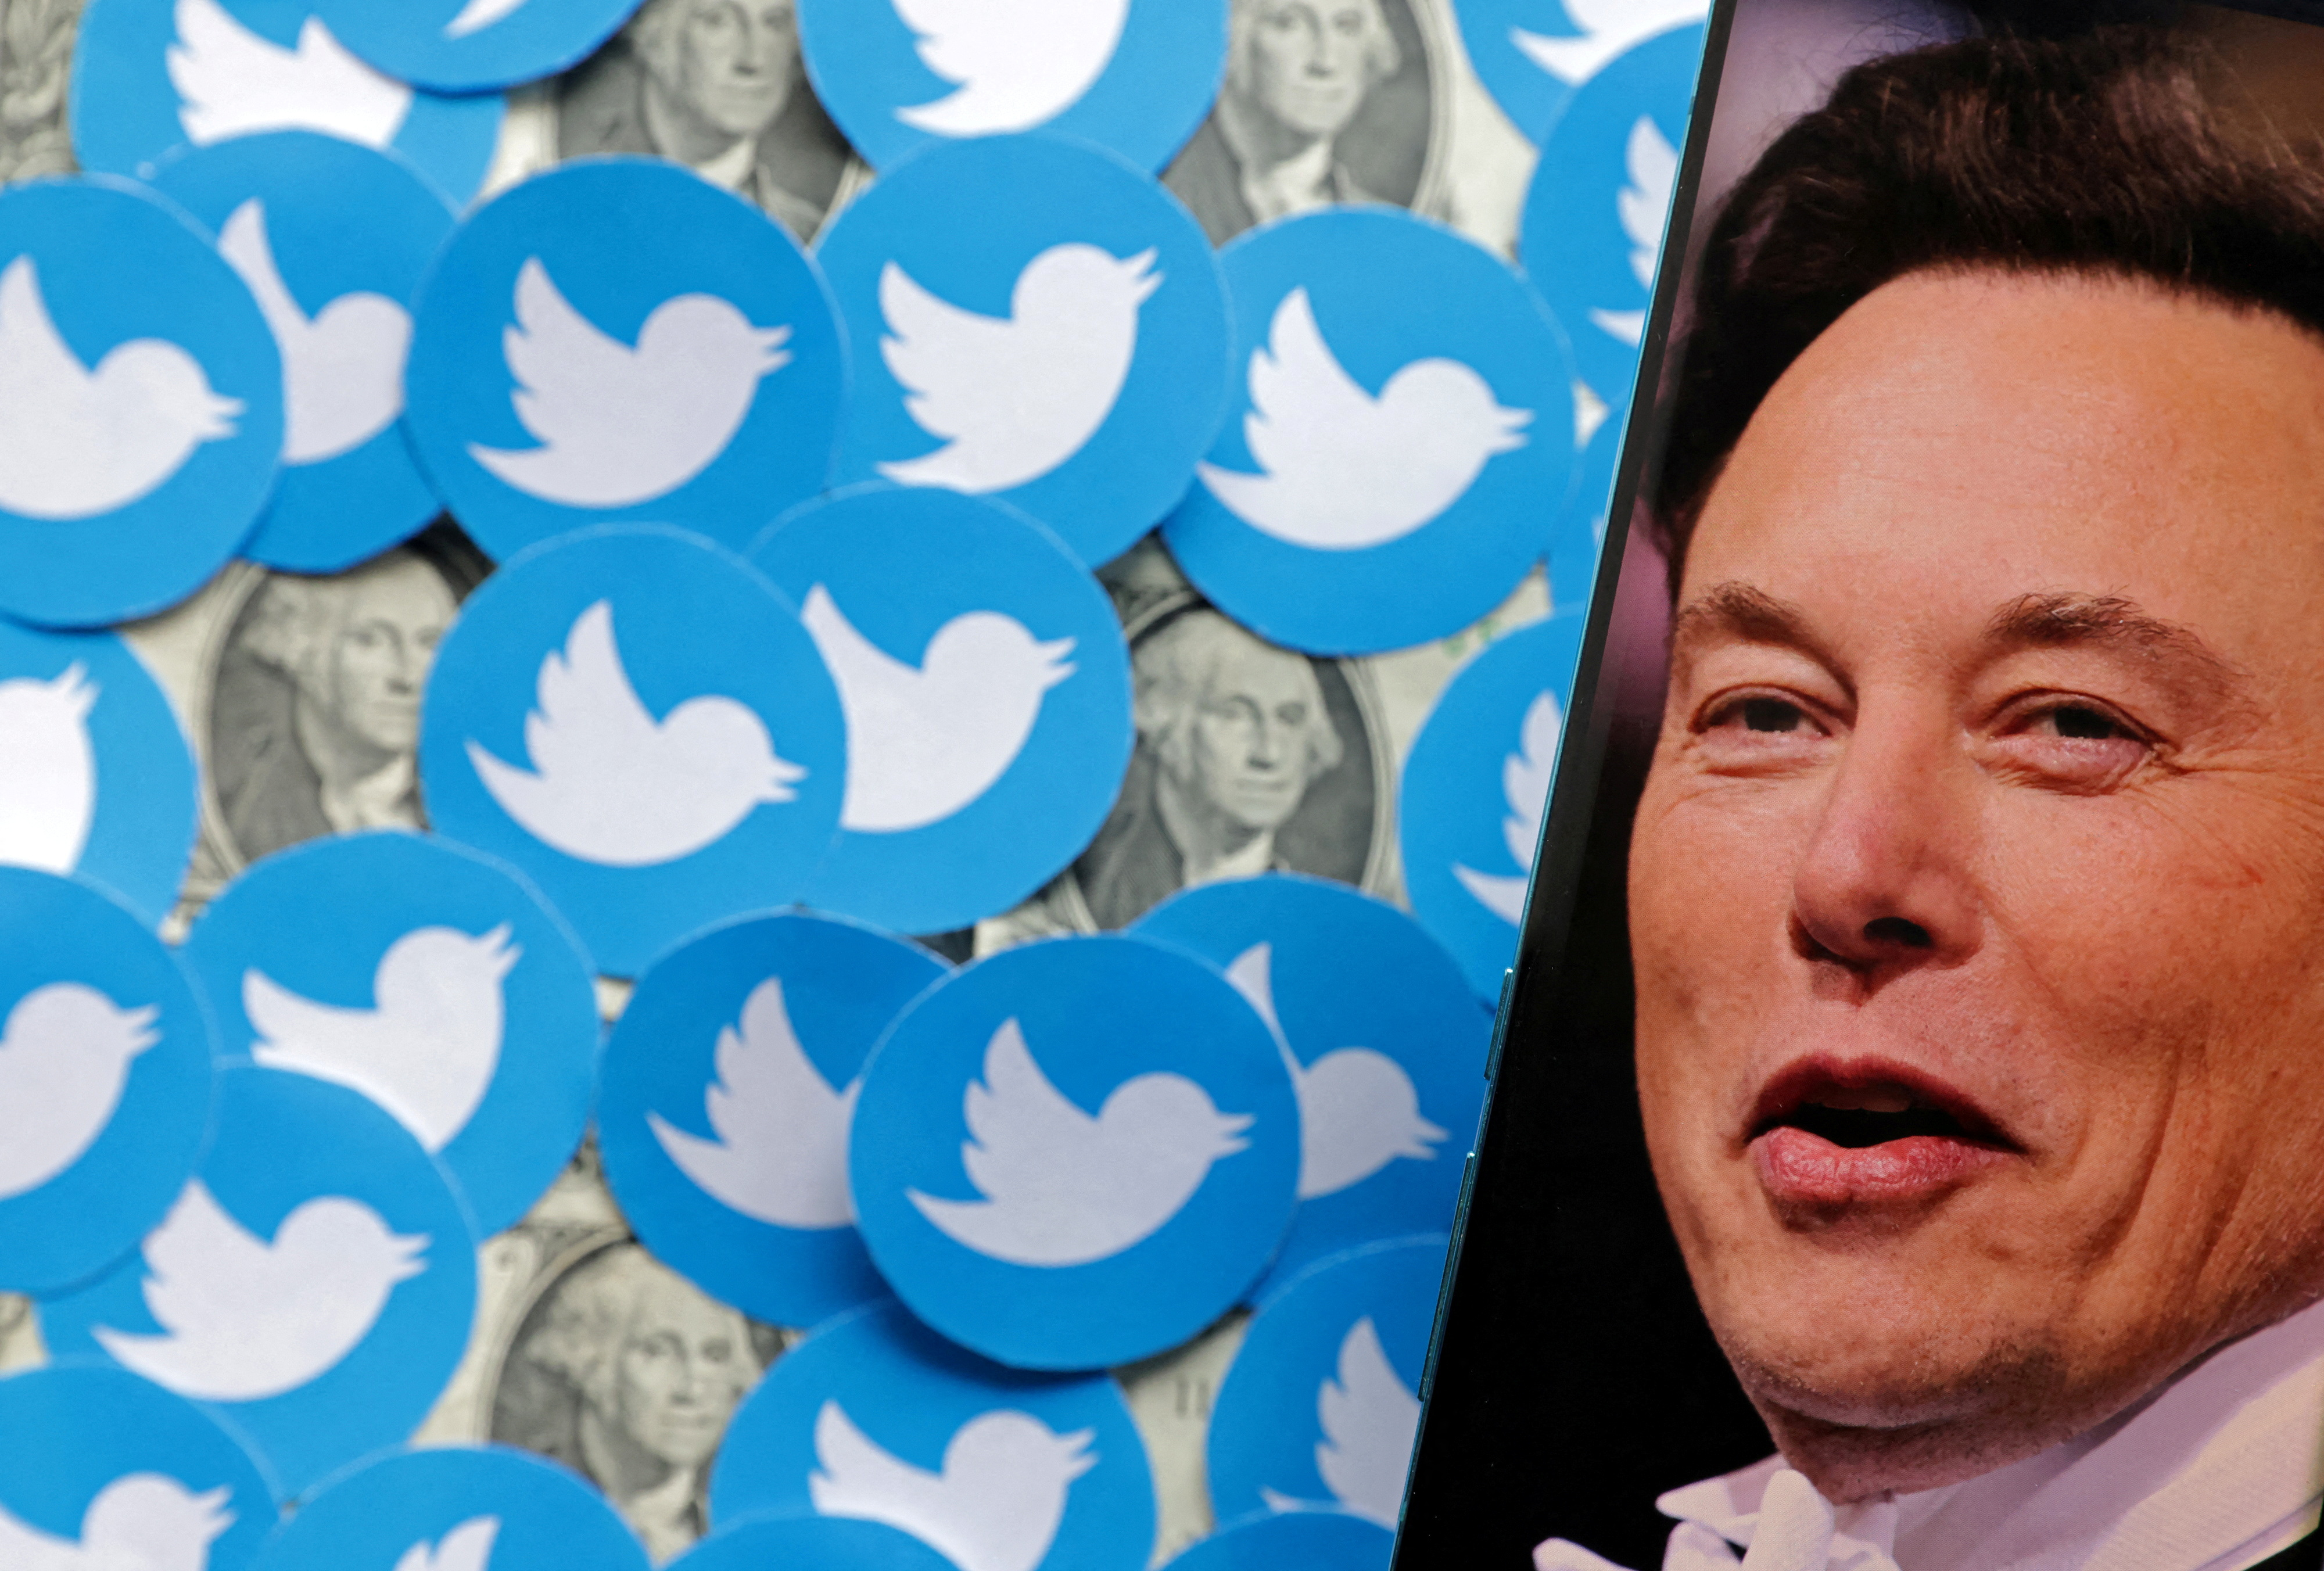 FILE PHOTO: Elon Musk photo, Twitter logos and U.S. dollar banknotes are seen in this illustration, August 10, 2022. REUTERS/Dado Ruvic/Illustration/File Photo